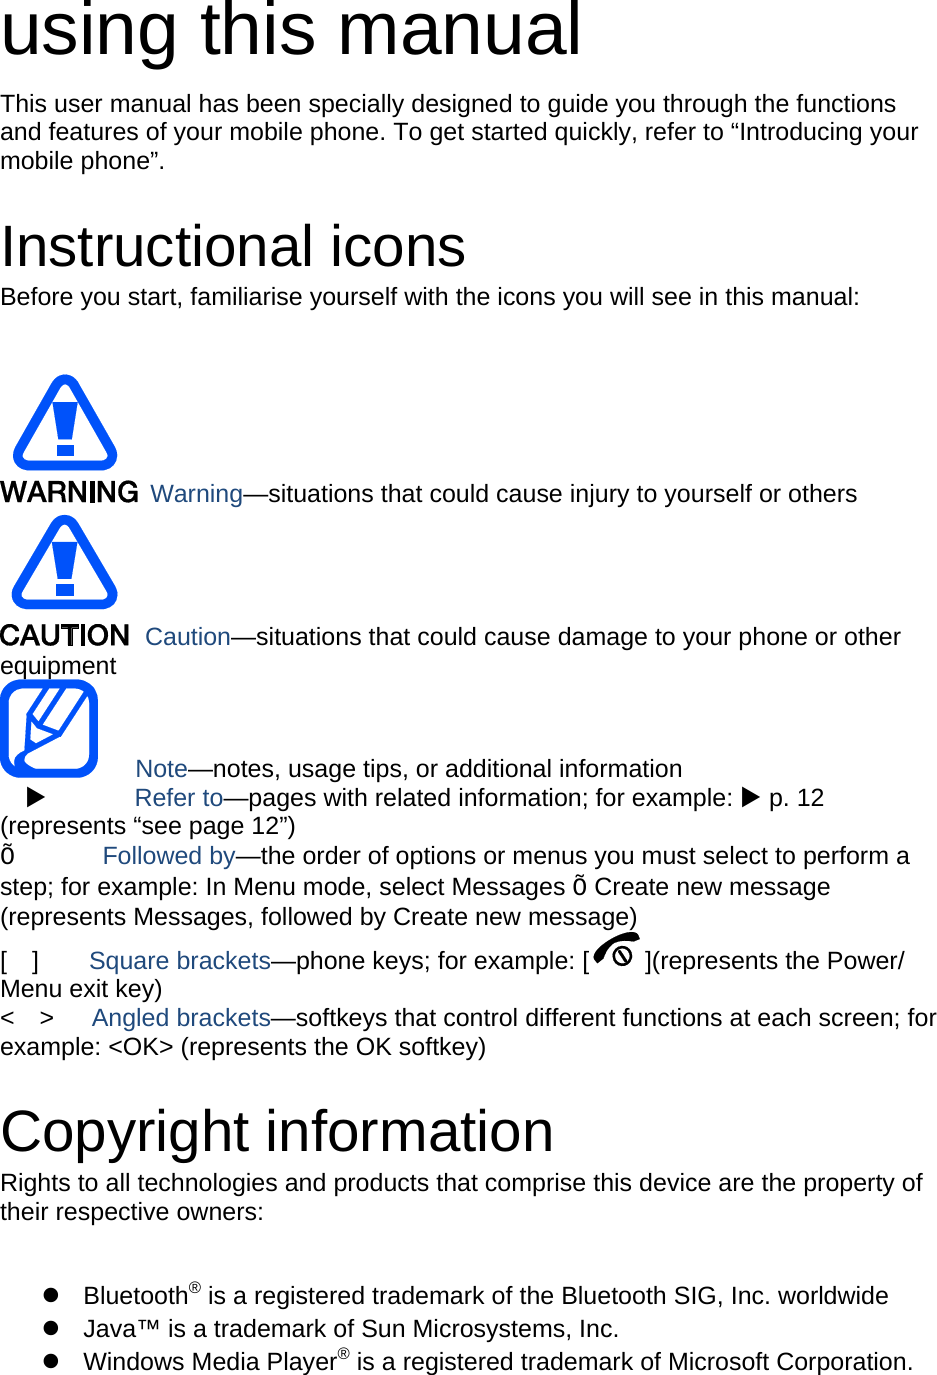 using this manual This user manual has been specially designed to guide you through the functions and features of your mobile phone. To get started quickly, refer to “Introducing your mobile phone”.  Instructional icons Before you start, familiarise yourself with the icons you will see in this manual:     Warning—situations that could cause injury to yourself or others  Caution—situations that could cause damage to your phone or other equipment    Note—notes, usage tips, or additional information          Refer to—pages with related information; for example:  p. 12 (represents “see page 12”) Õ       Followed by—the order of options or menus you must select to perform a step; for example: In Menu mode, select Messages Õ Create new message (represents Messages, followed by Create new message) [  ]    Square brackets—phone keys; for example: [ ](represents the Power/ Menu exit key) &lt;  &gt;   Angled brackets—softkeys that control different functions at each screen; for example: &lt;OK&gt; (represents the OK softkey)  Copyright information Rights to all technologies and products that comprise this device are the property of their respective owners:   Bluetooth® is a registered trademark of the Bluetooth SIG, Inc. worldwide   Java™ is a trademark of Sun Microsystems, Inc.  Windows Media Player® is a registered trademark of Microsoft Corporation. 